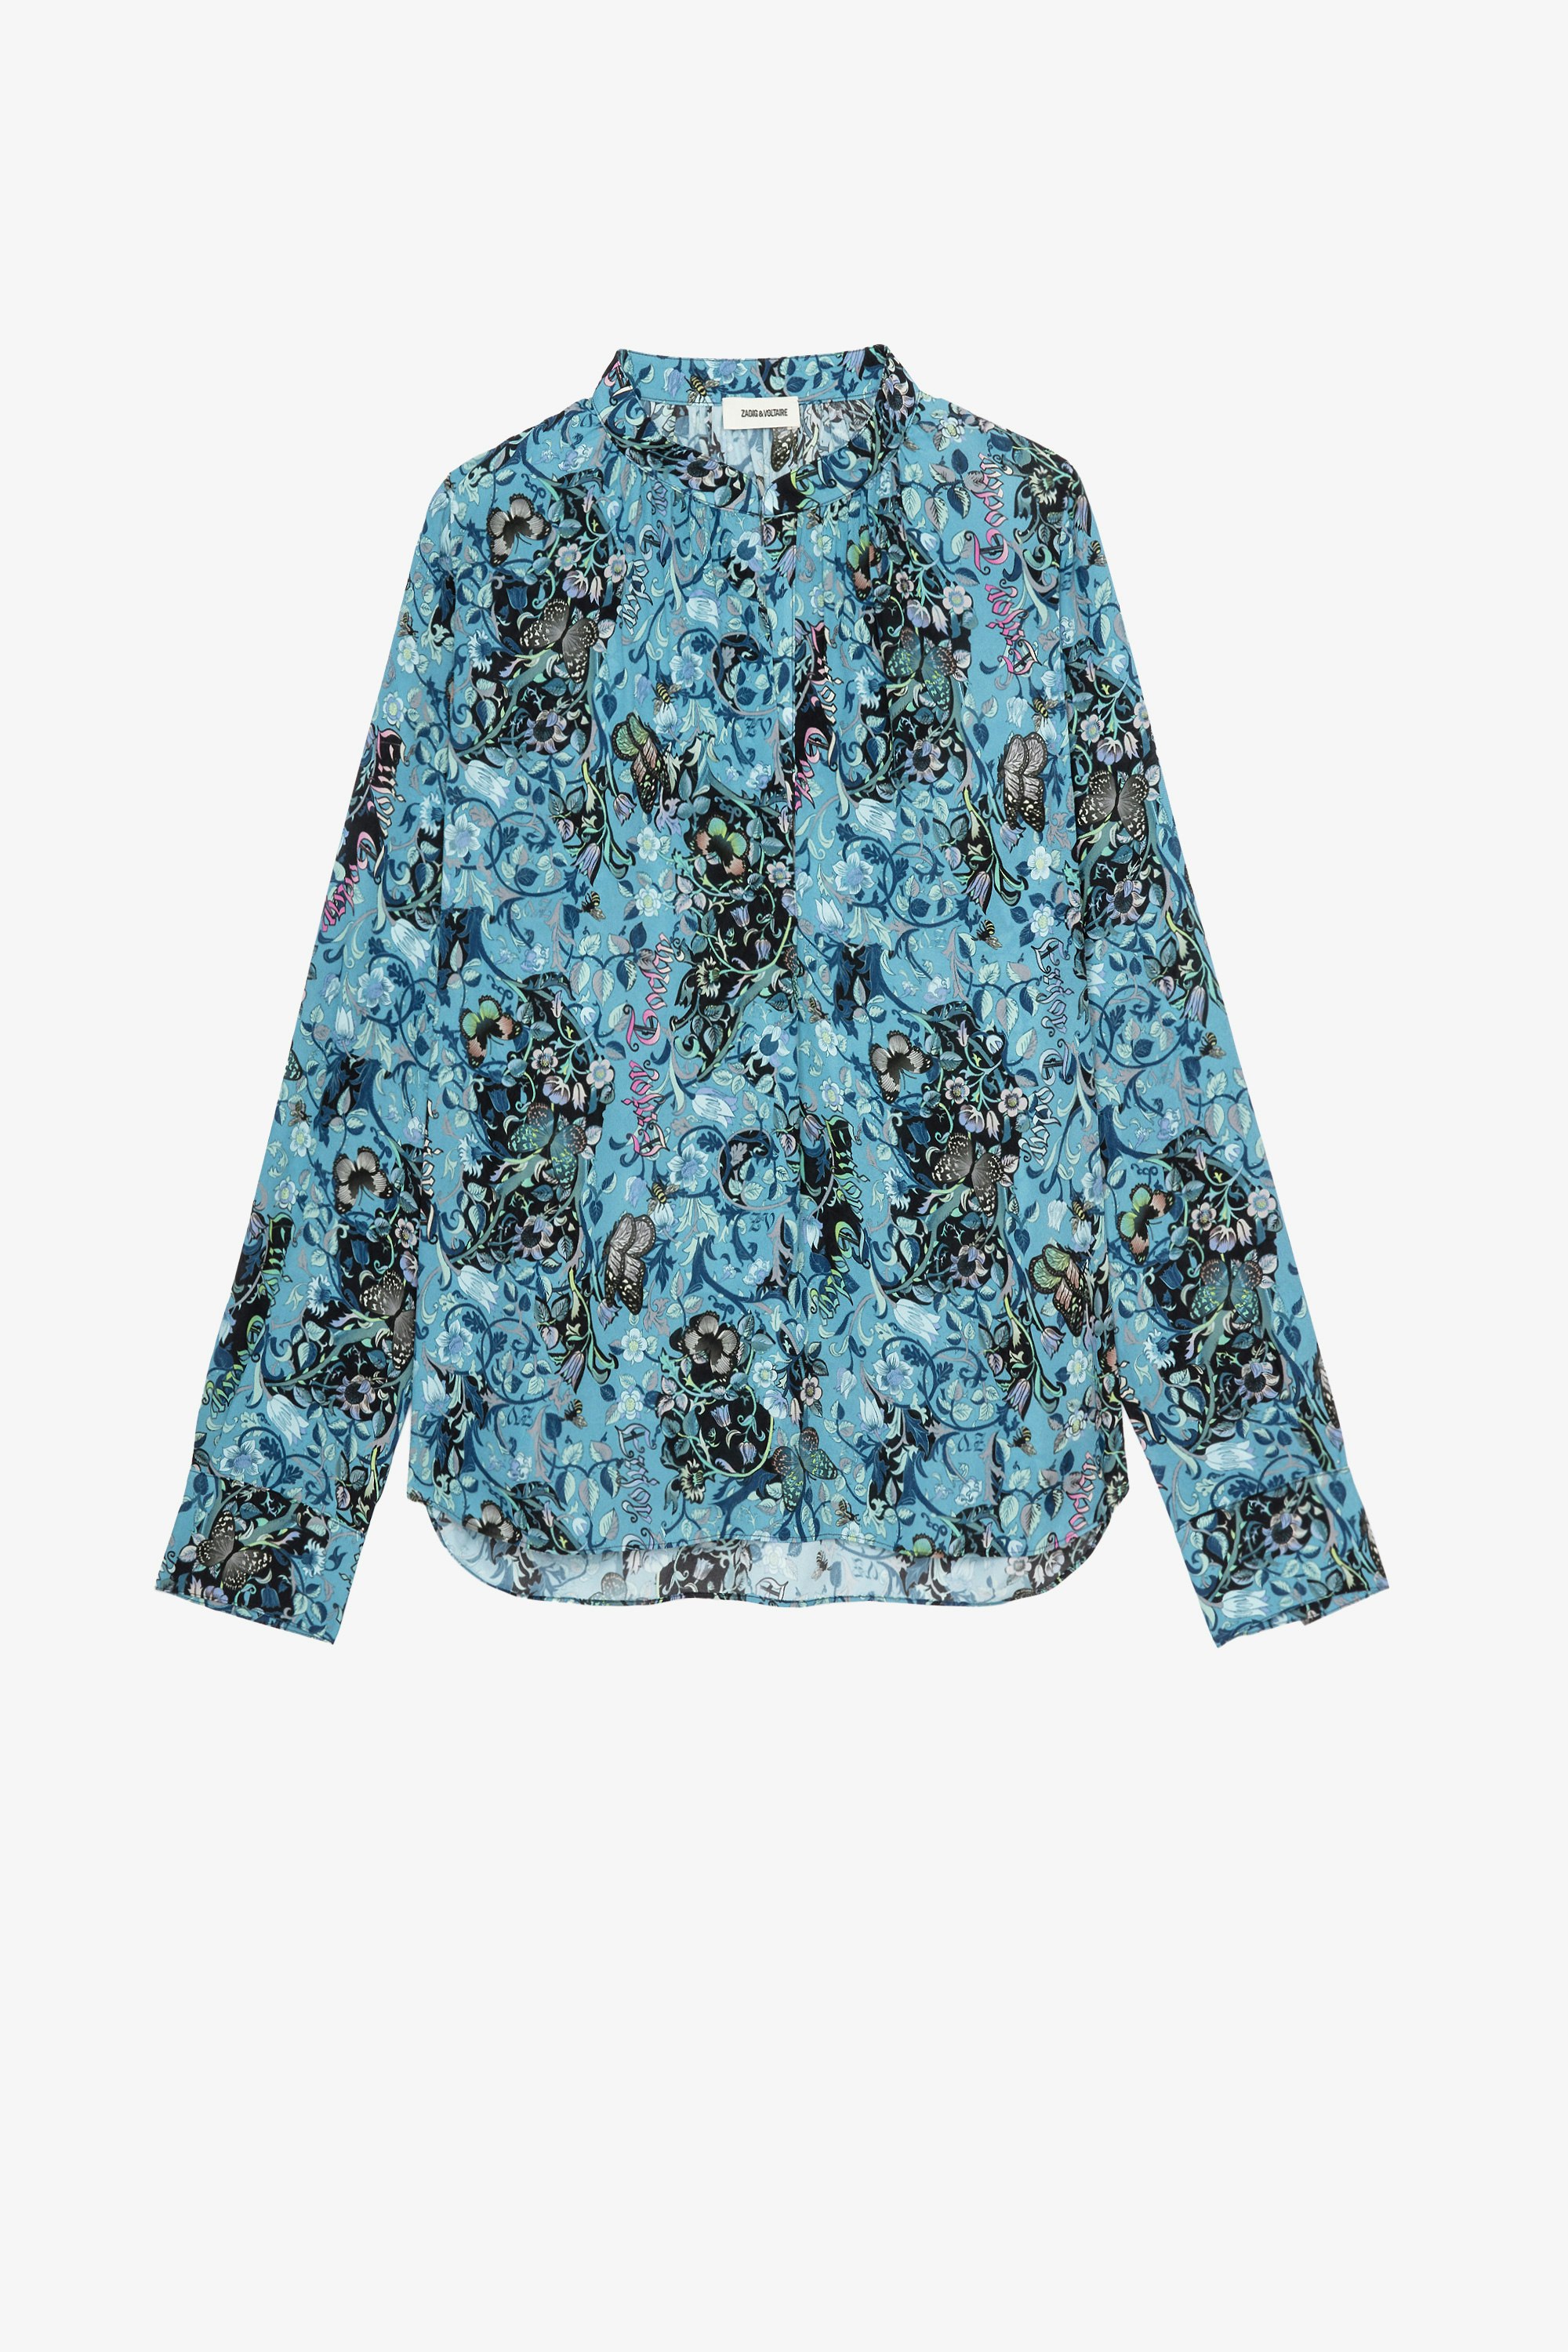 Tink Bohemian シャツ Women's satiny blue shirt with floral print 